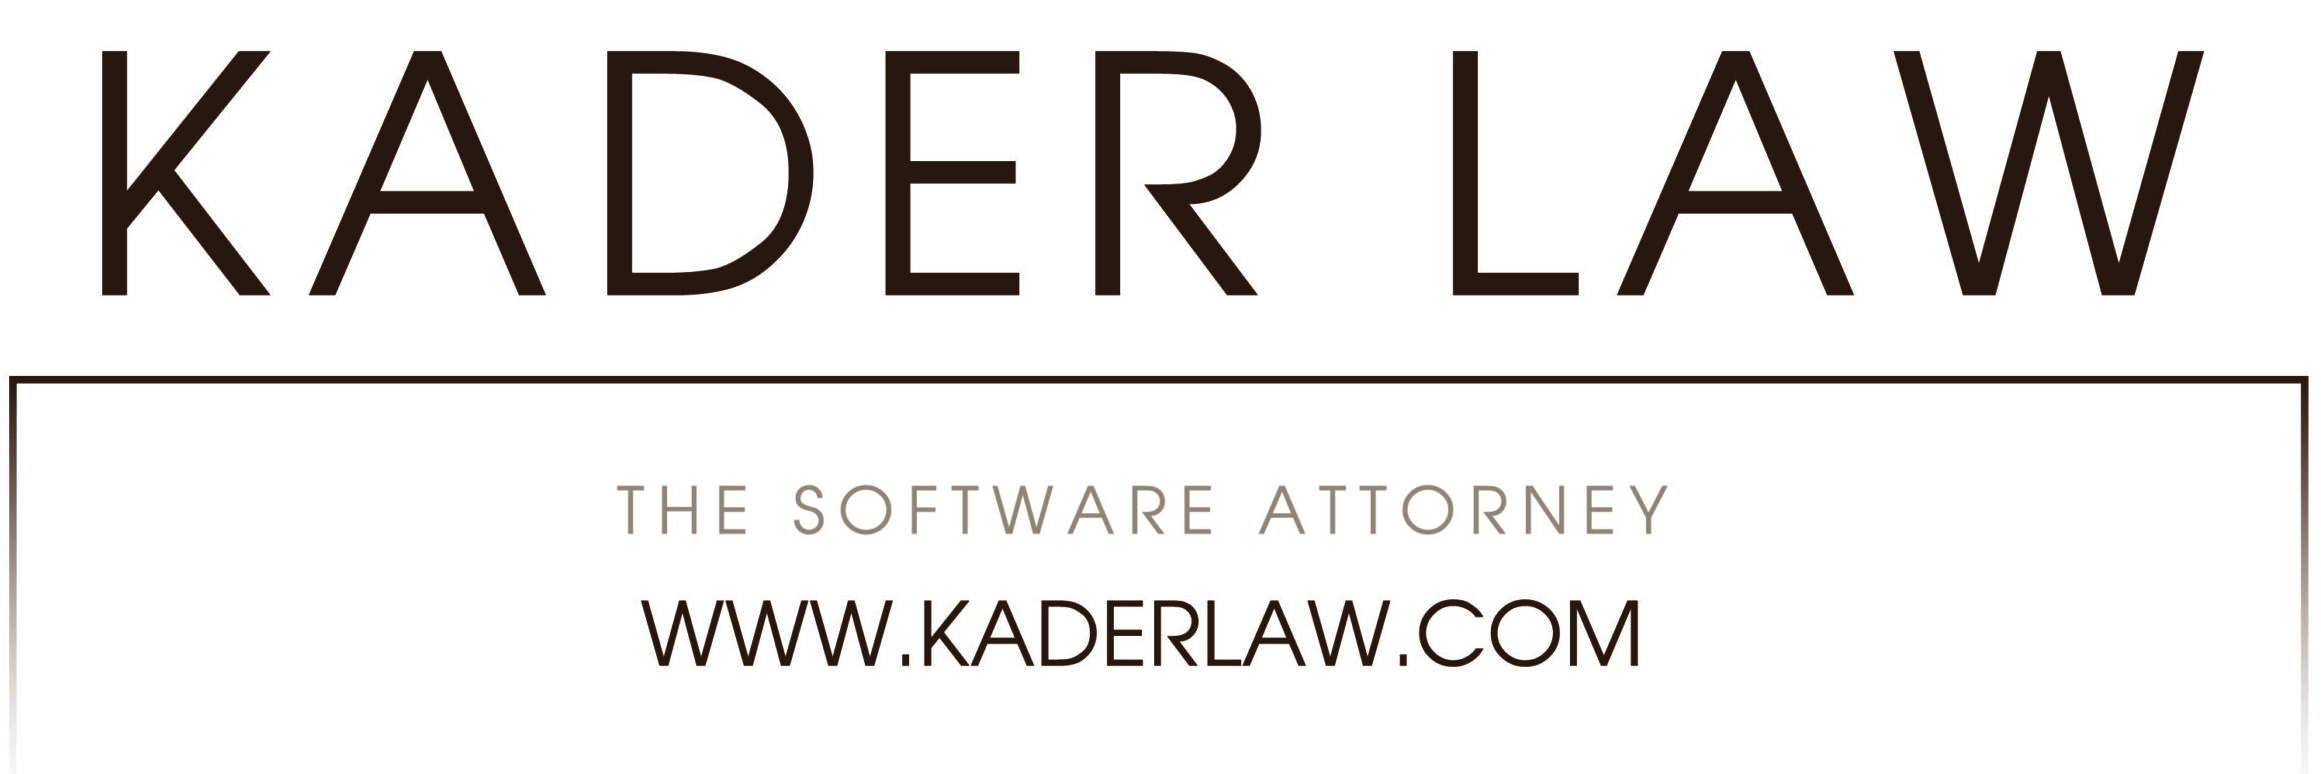 Kader Law - The Software Attorney